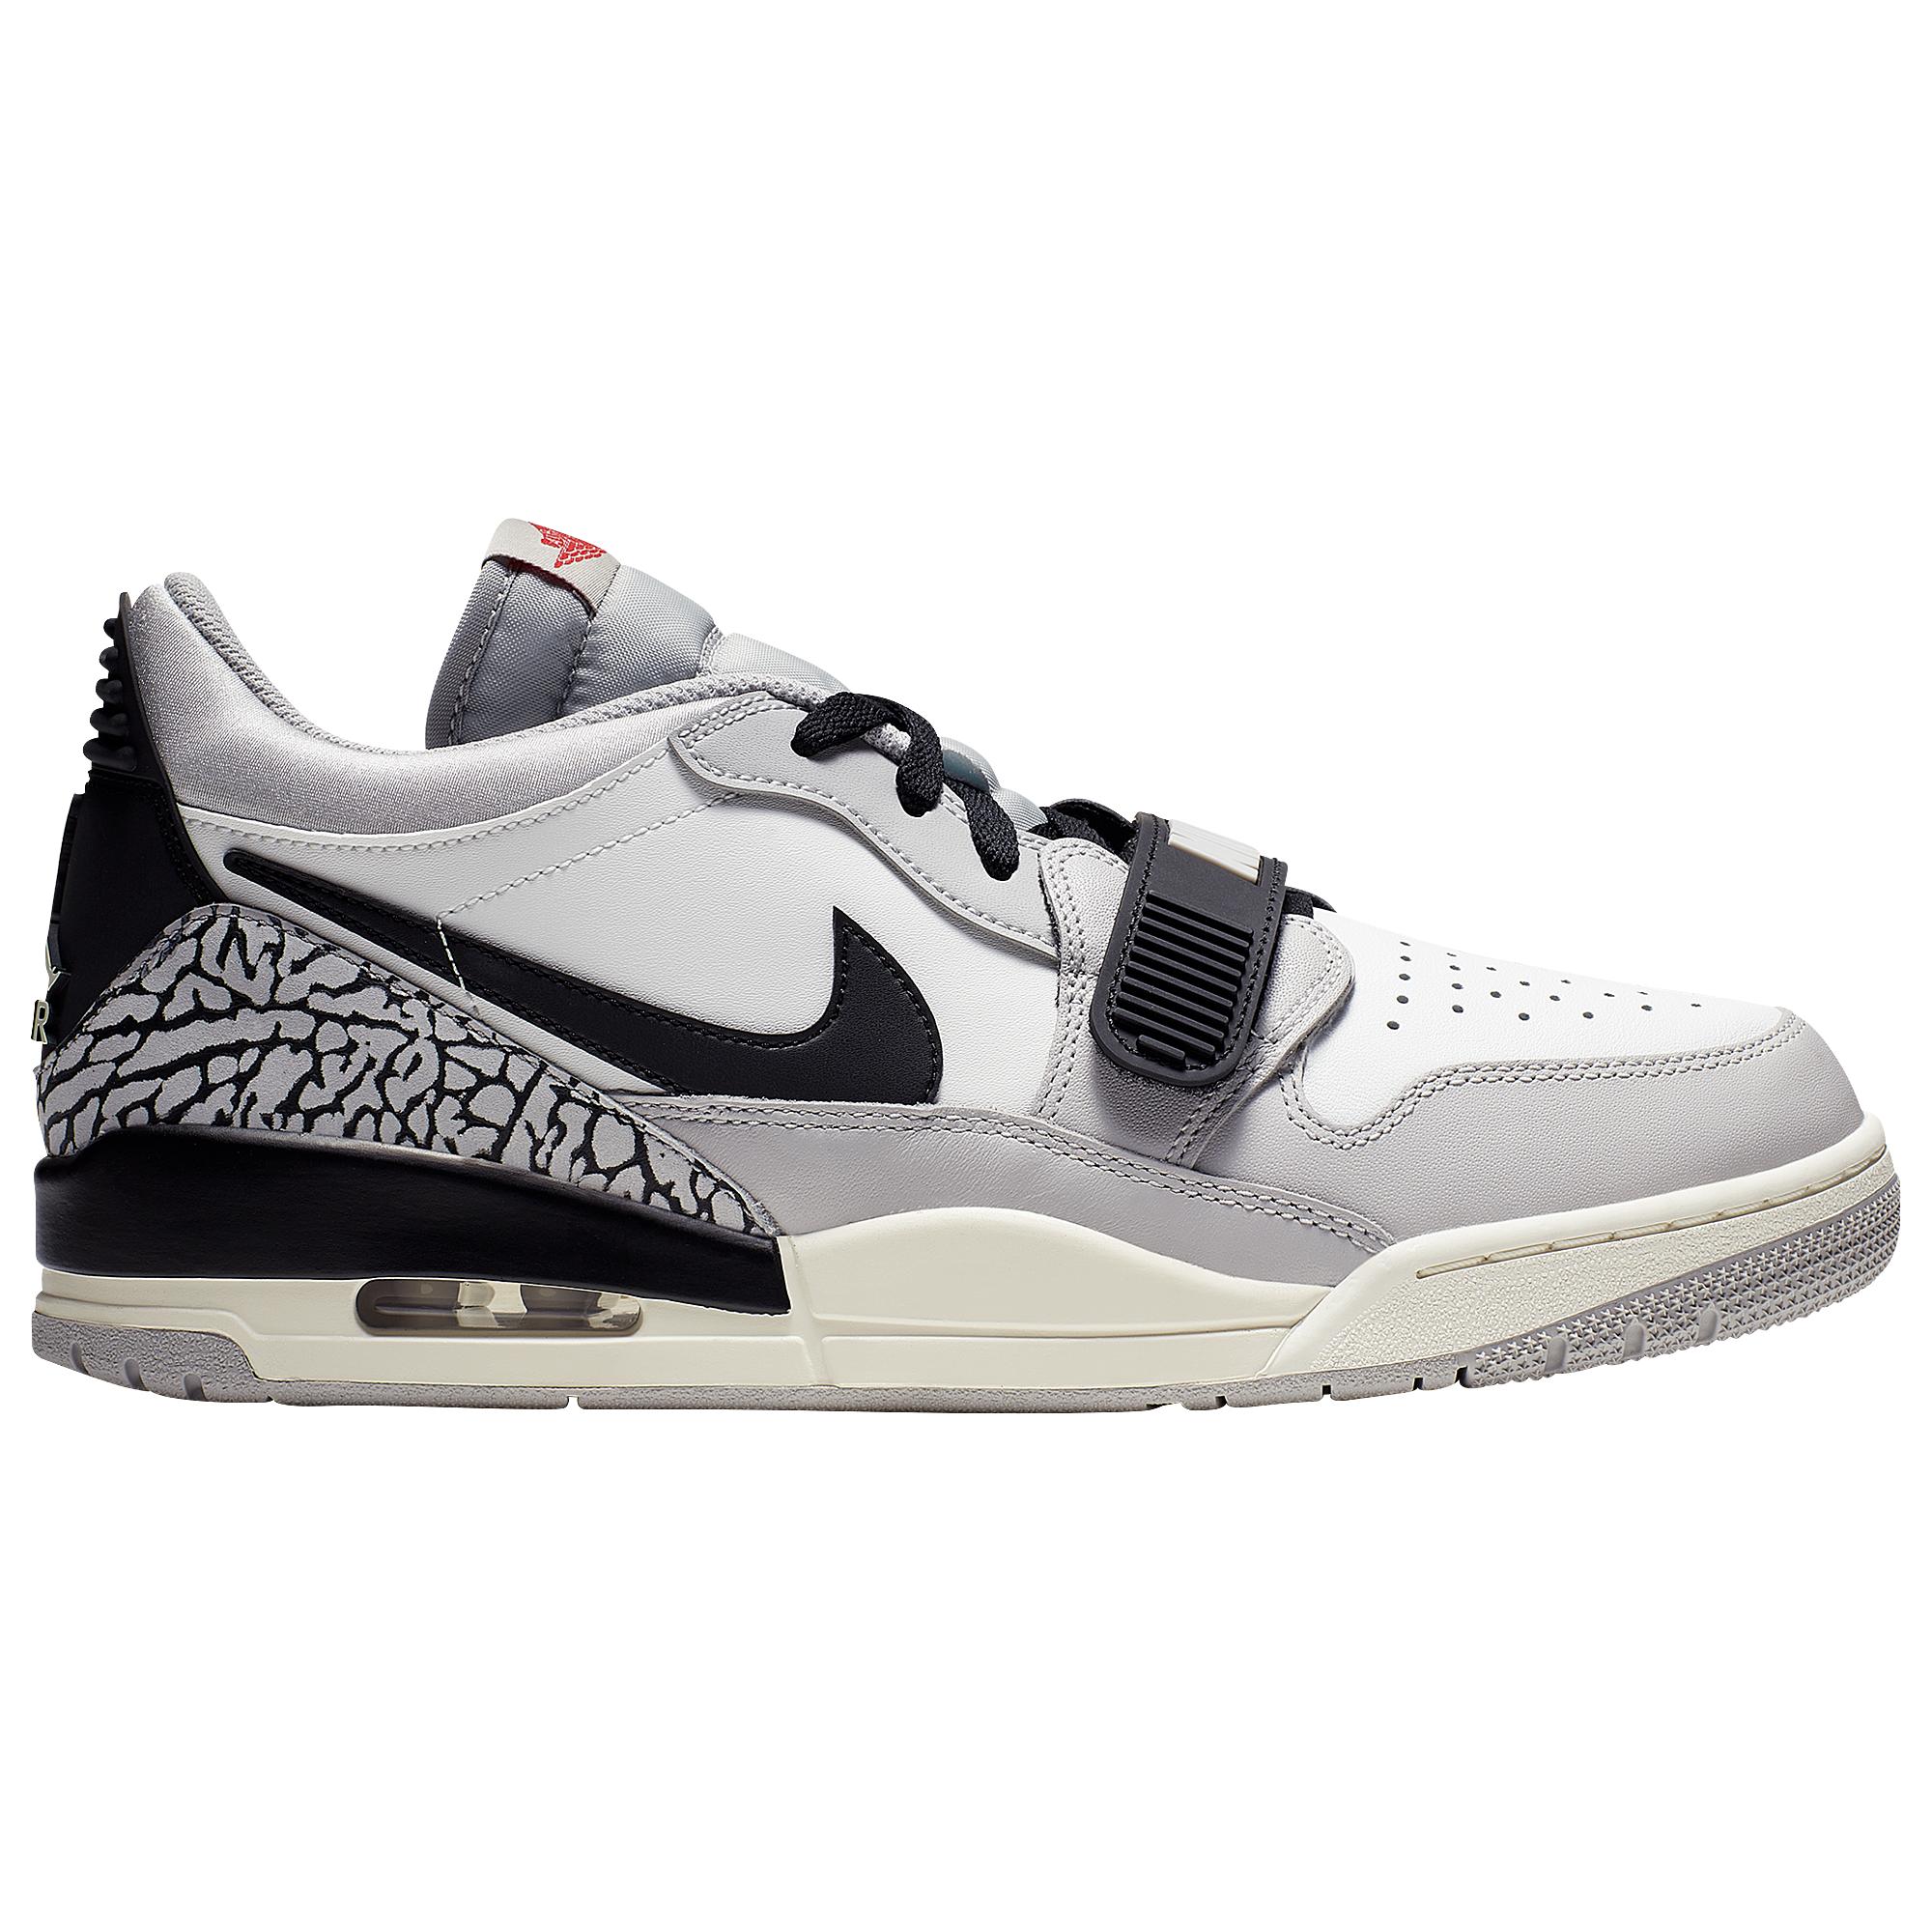 Nike Legacy 312 Low in Gray for Men - Save 7% - Lyst